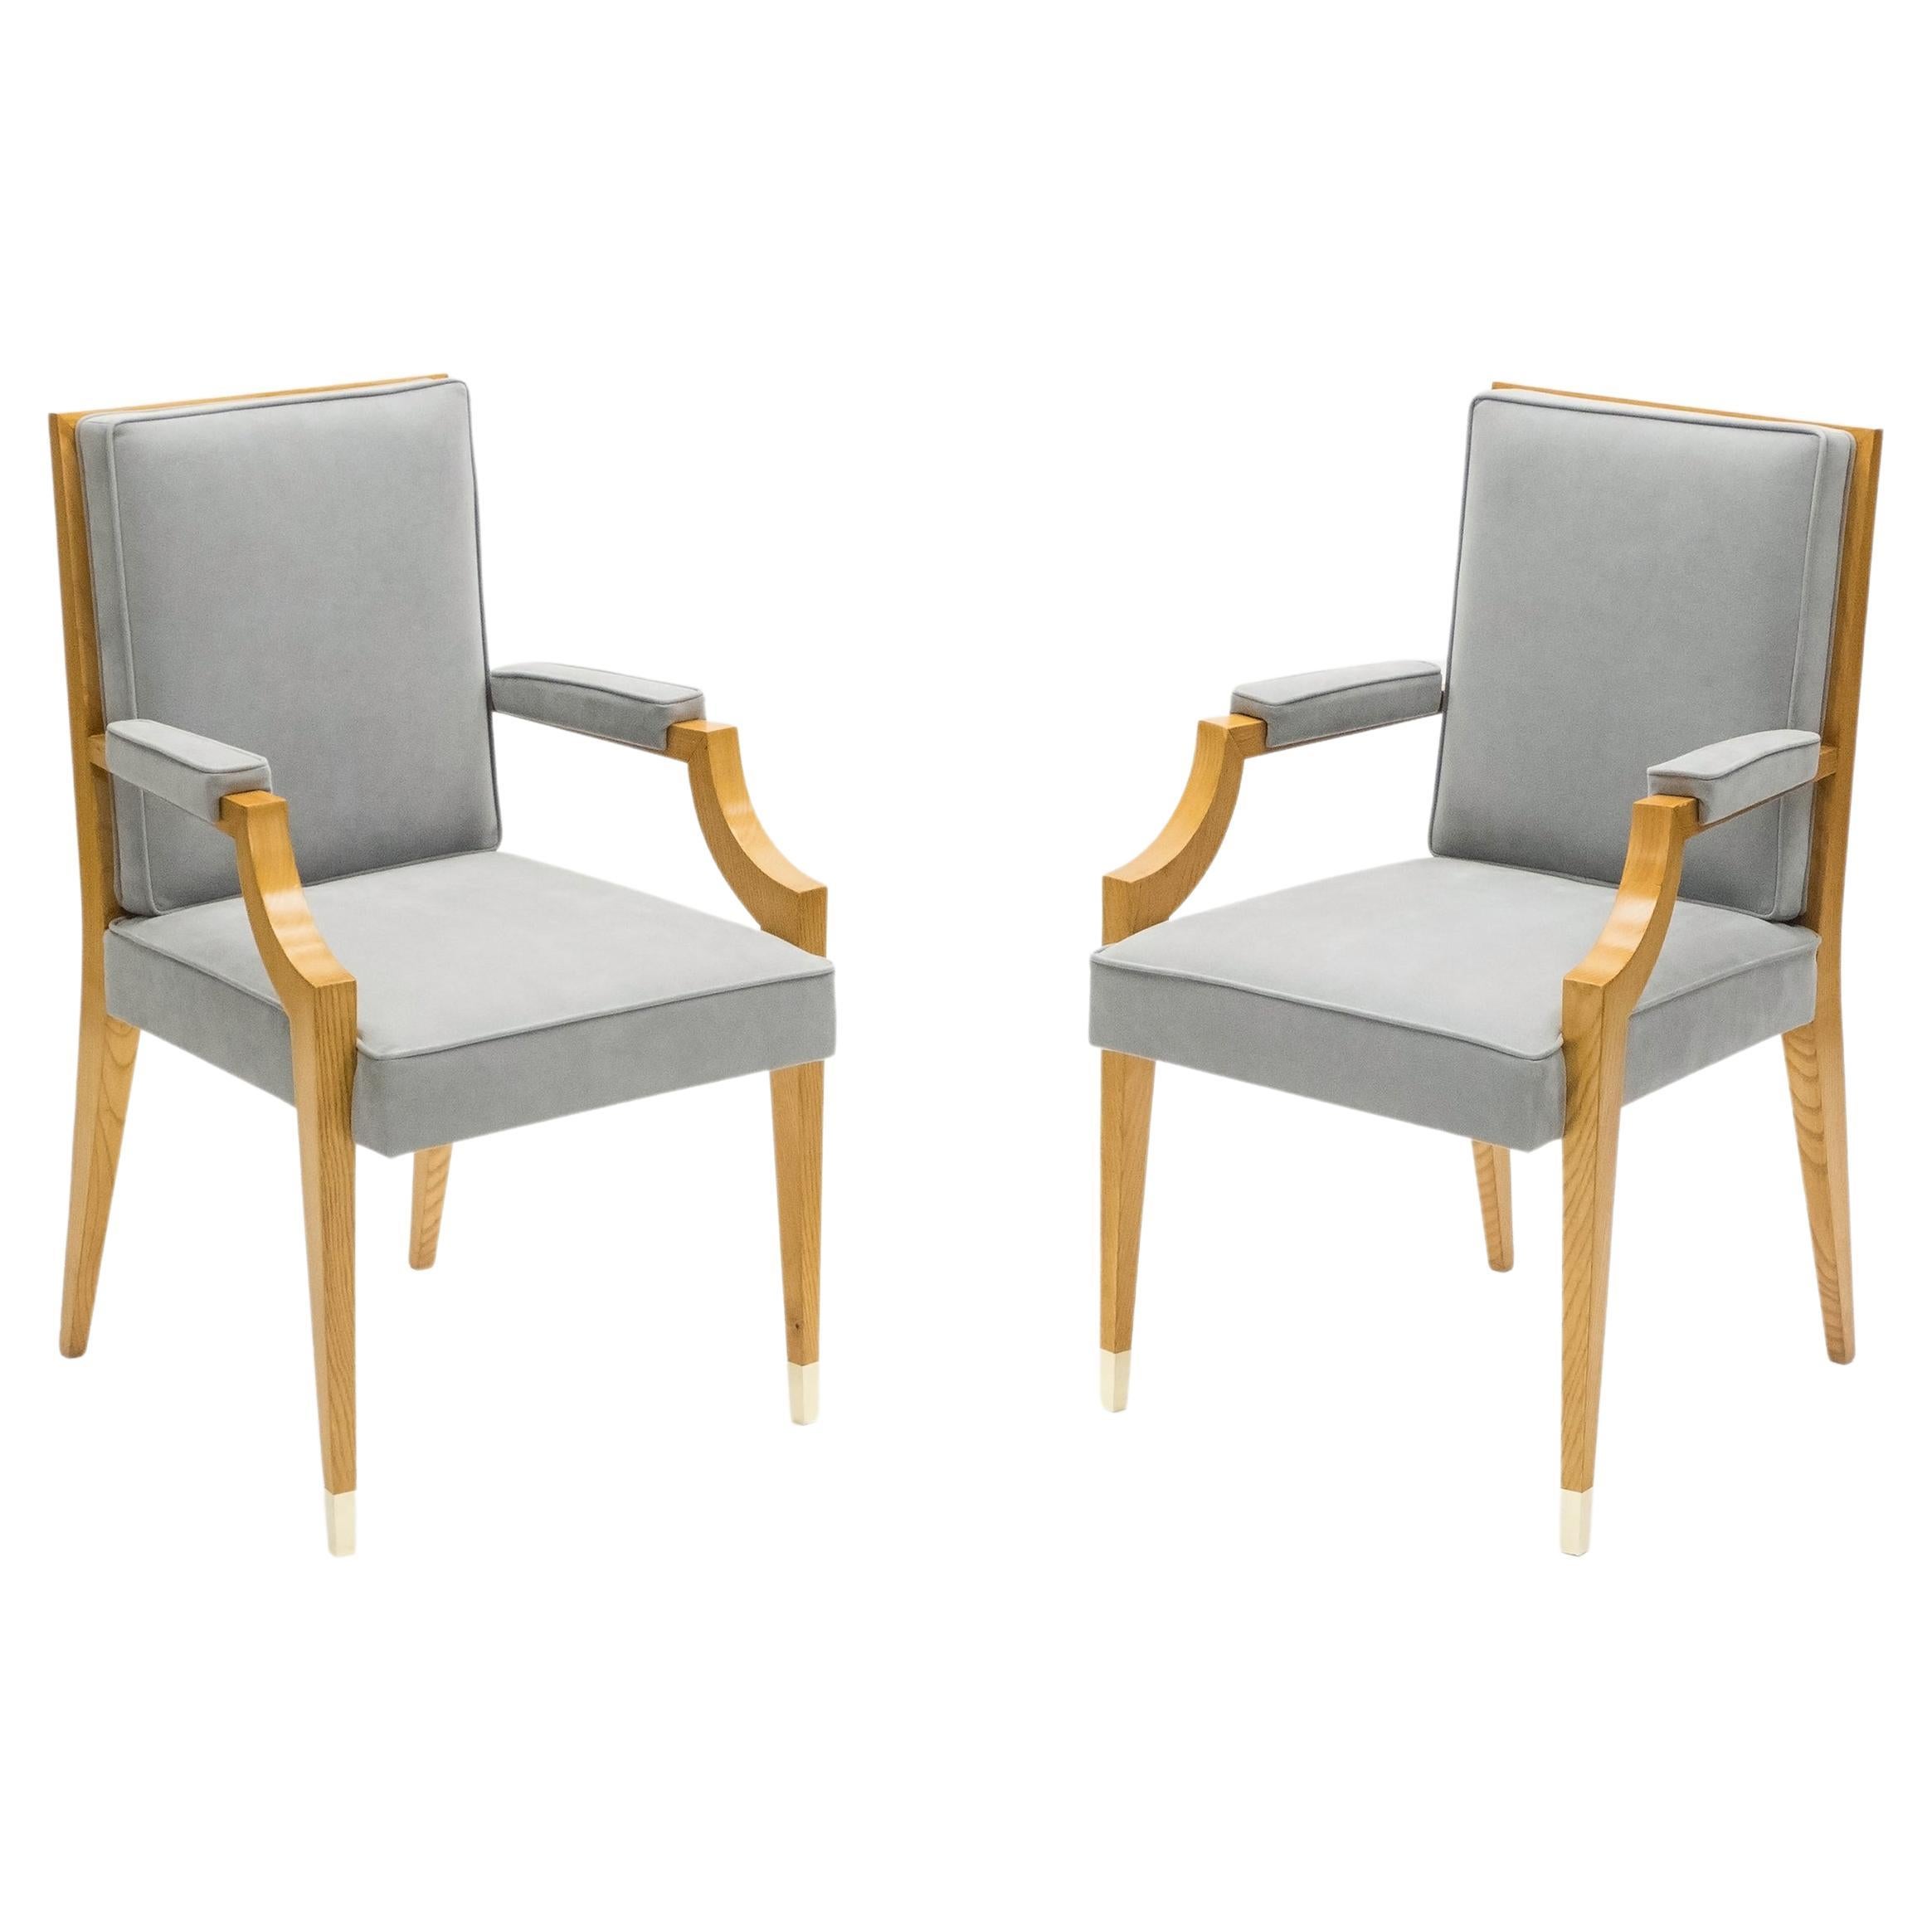 André Arbus Pair of Ash Wood Neoclassical Armchairs, 1940s